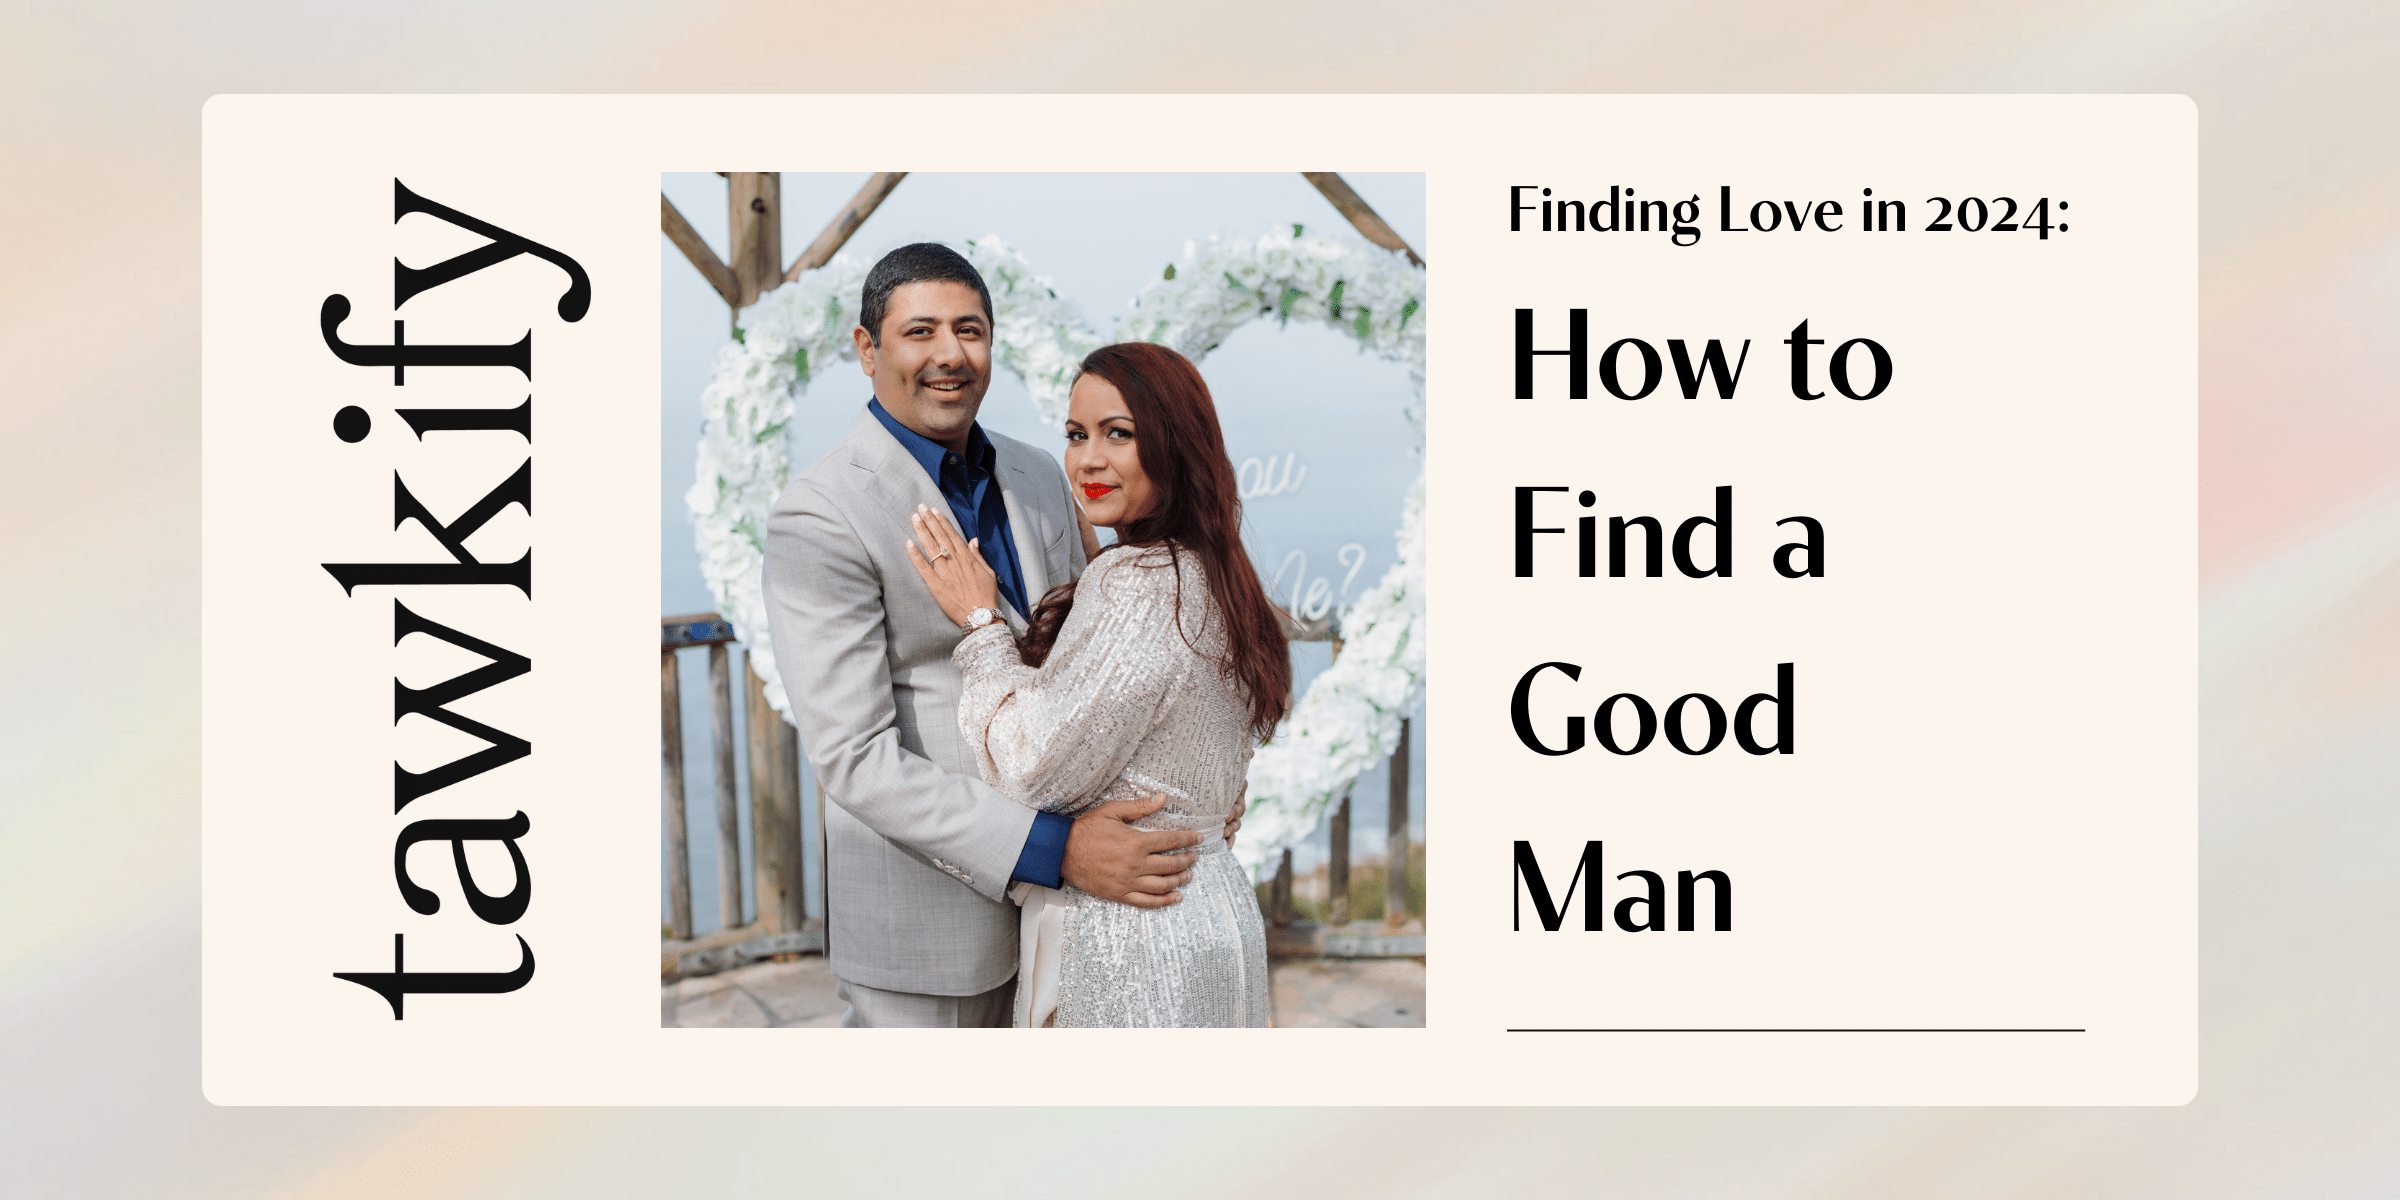 It’s time to start dating in 2024! But how do you meet someone special? Follow our guide on how to find a good man in the new year.